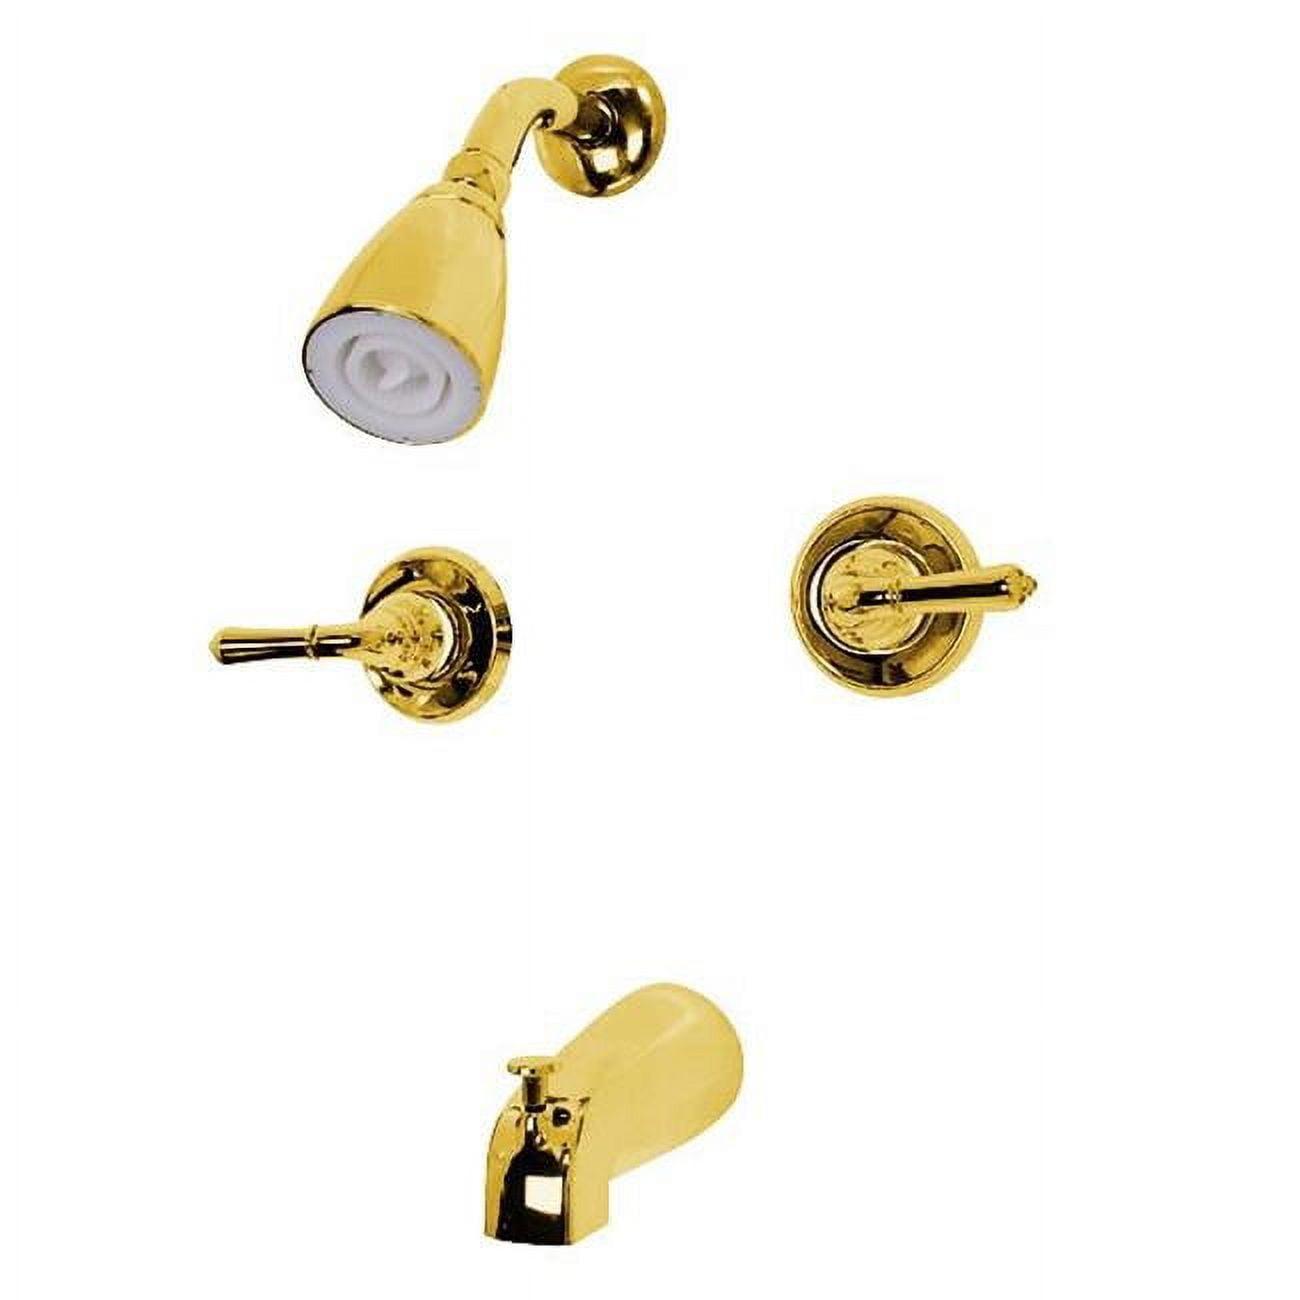 Magellan Polished Brass Multi-Head Wall-Mounted Tub and Shower Faucet